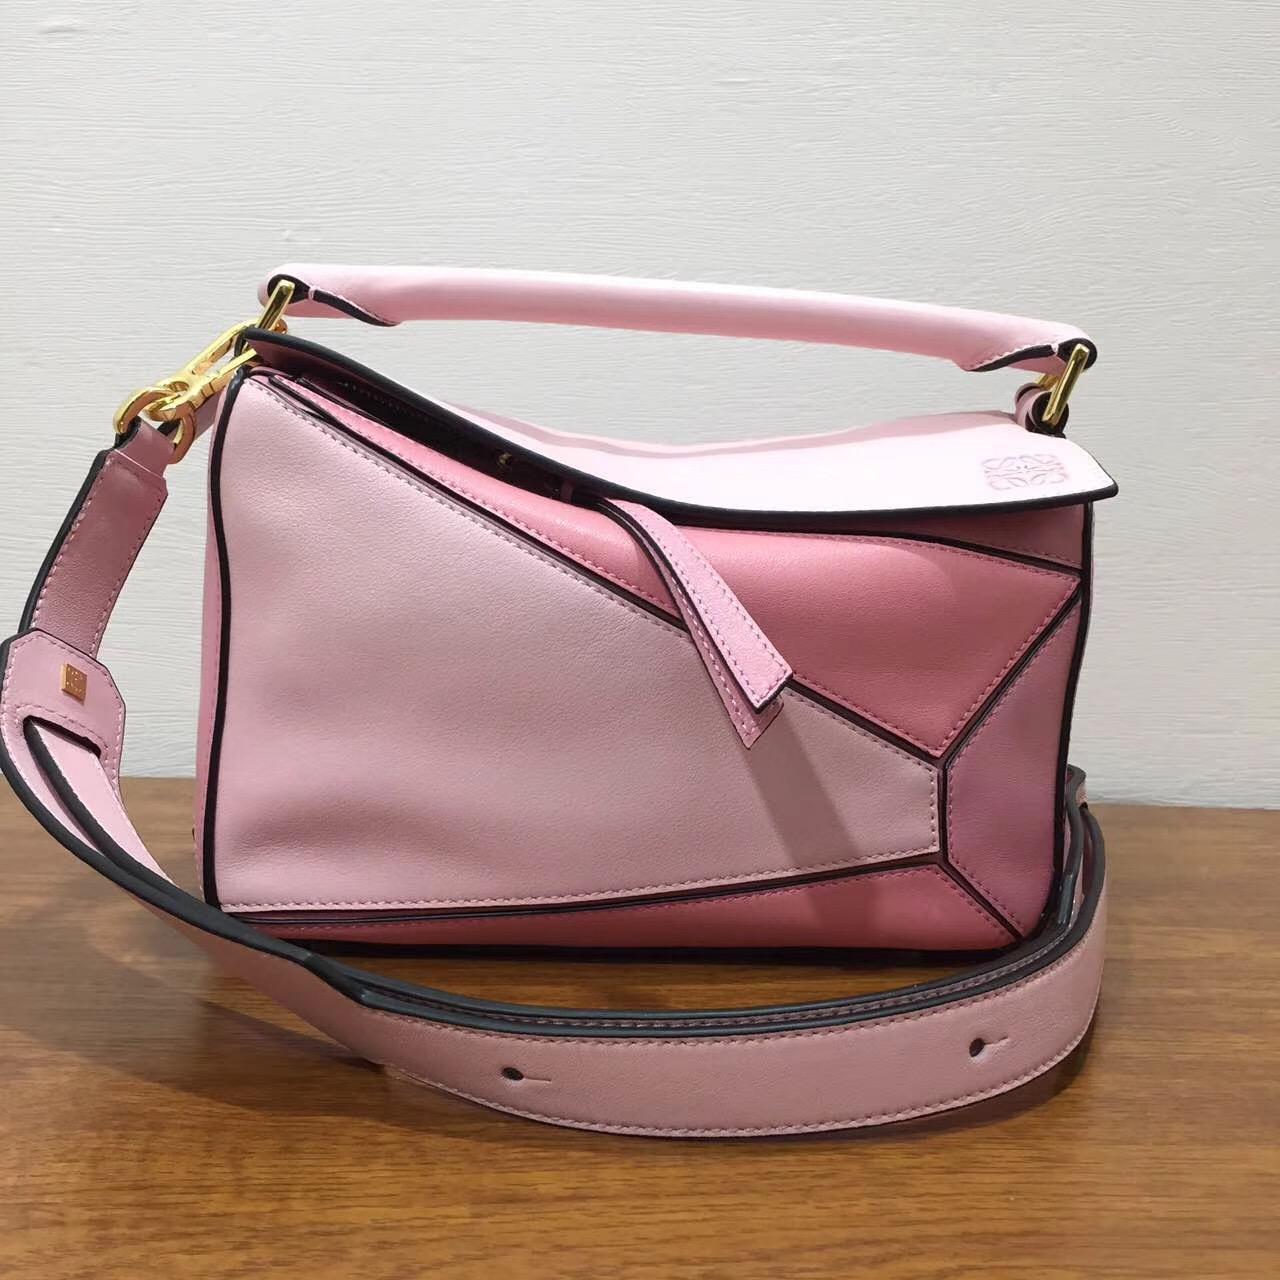 loewe羅意威 Puzzle Small Bag soft pink/candy/dark pink